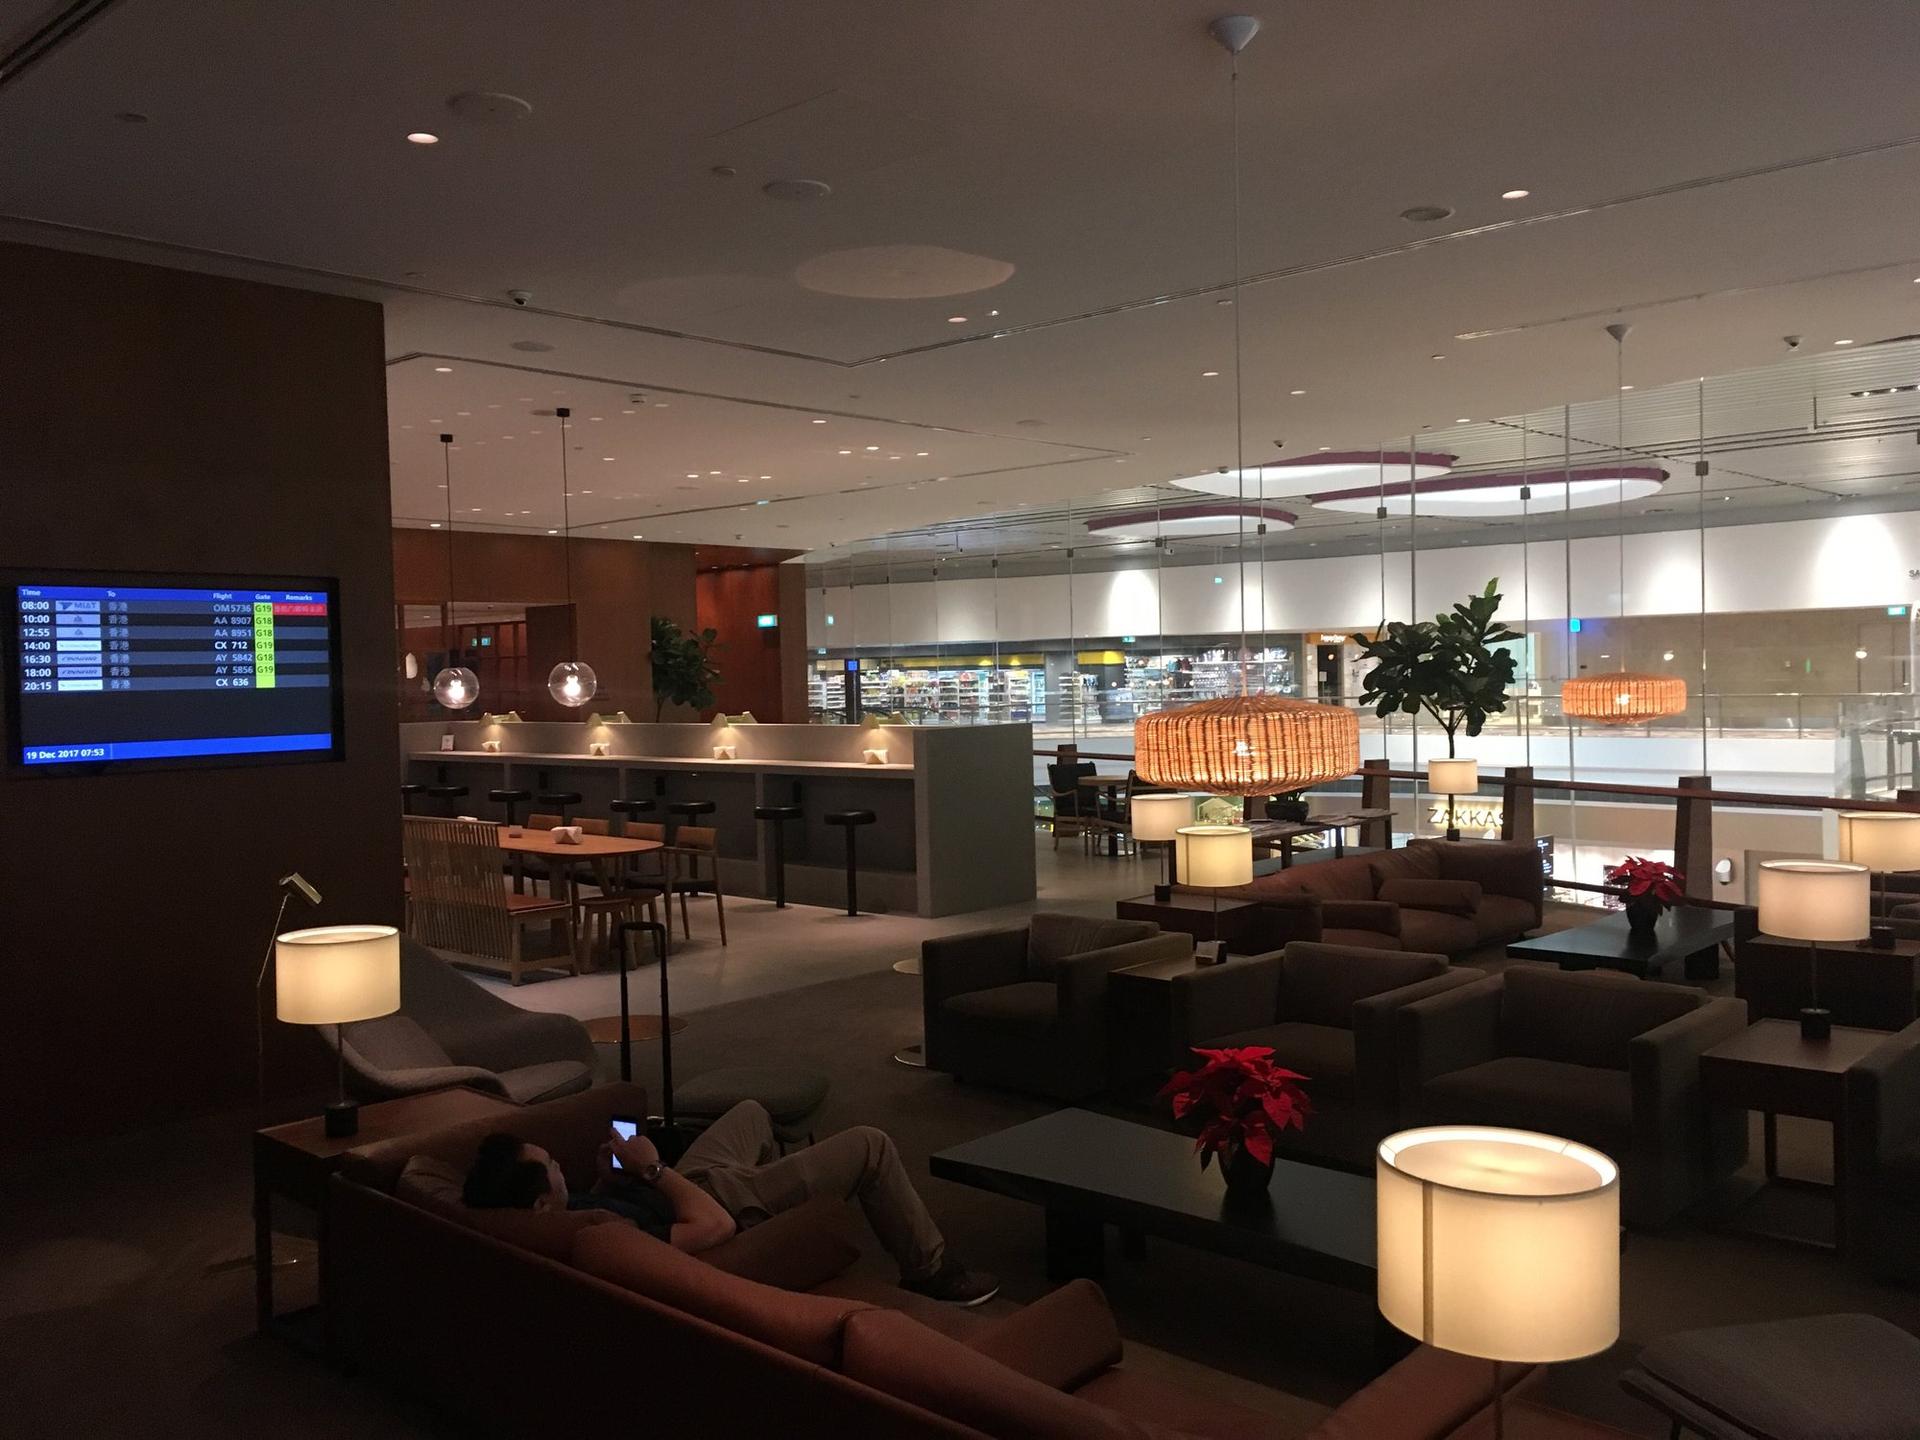 Cathay Pacific Lounge image 16 of 60